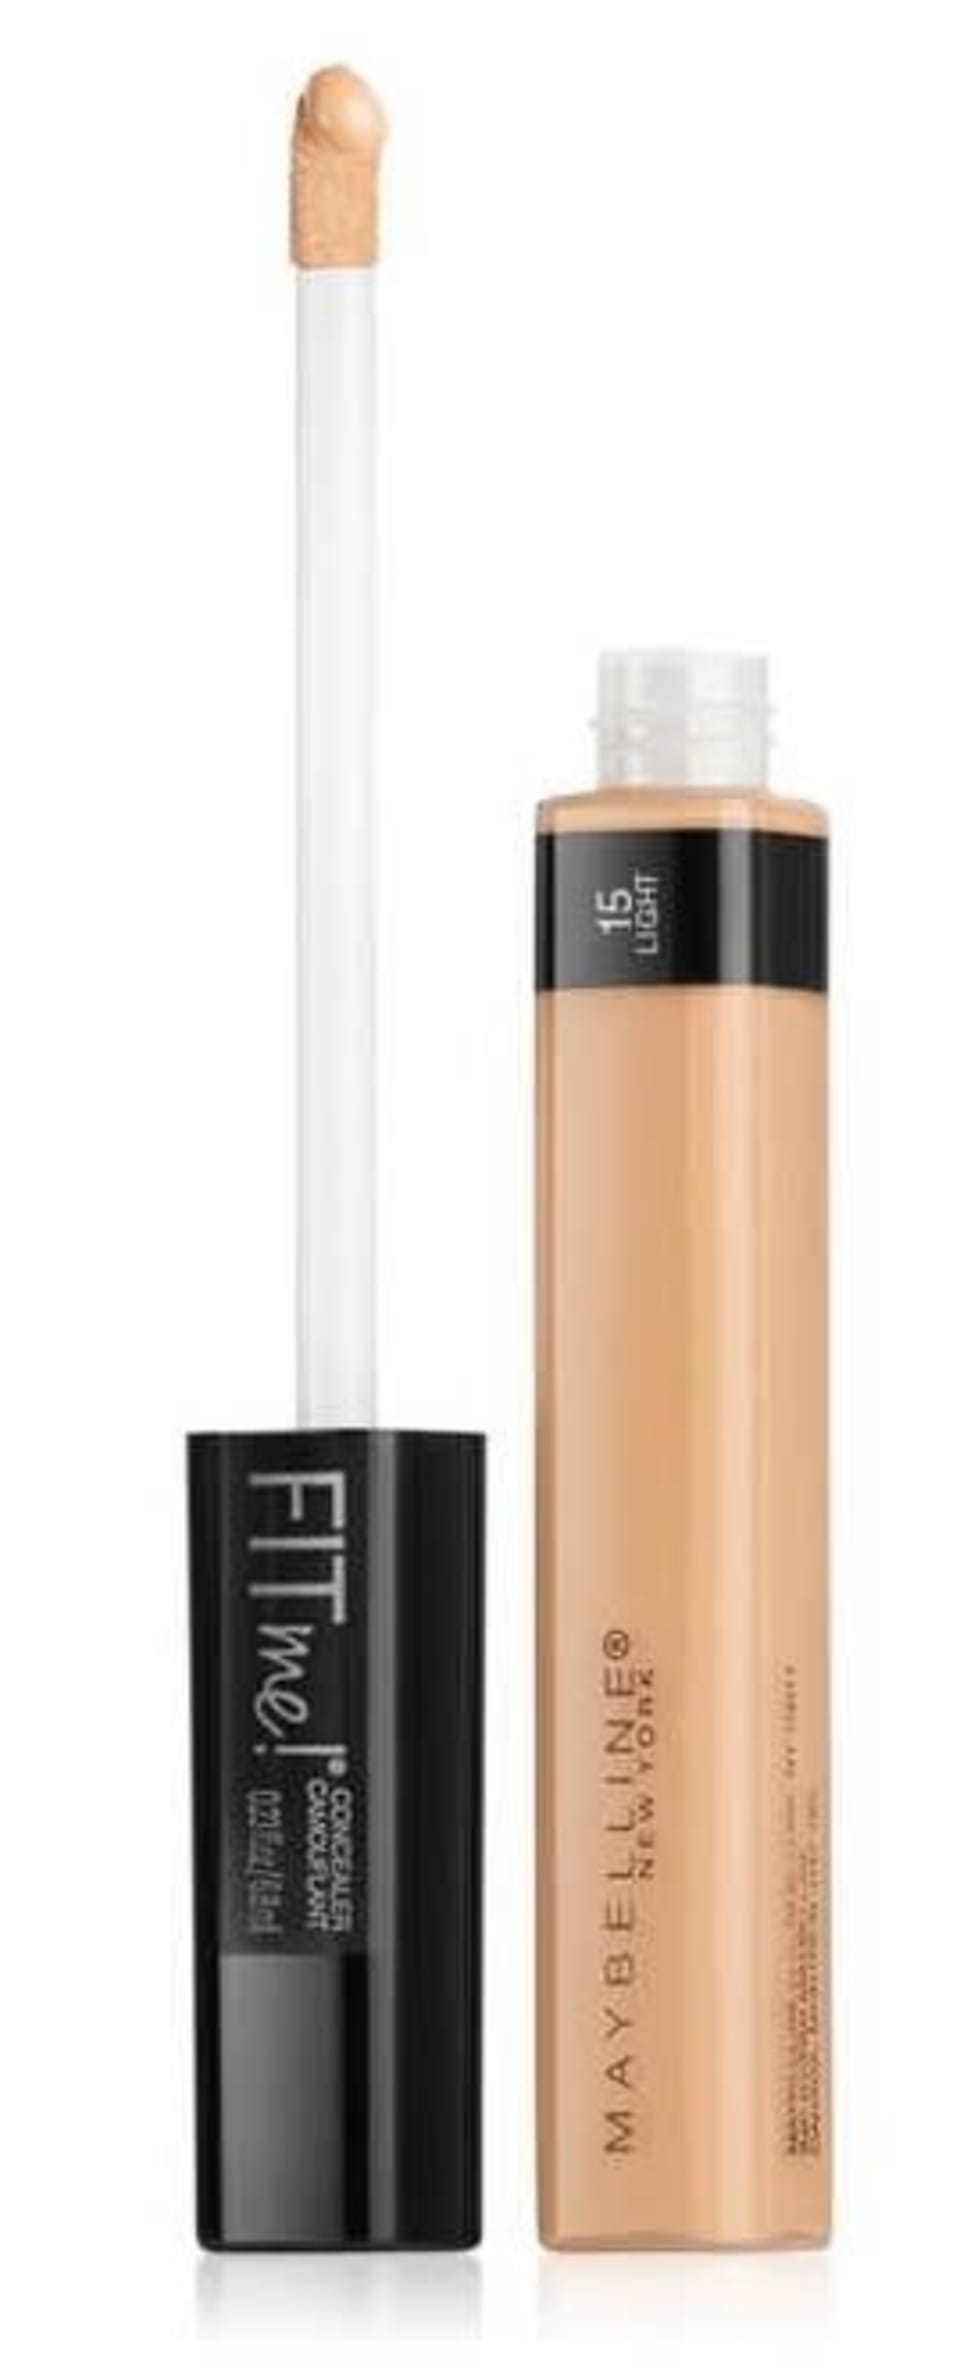 7 Best Concealers For Oily Skin in The Philippines 2021